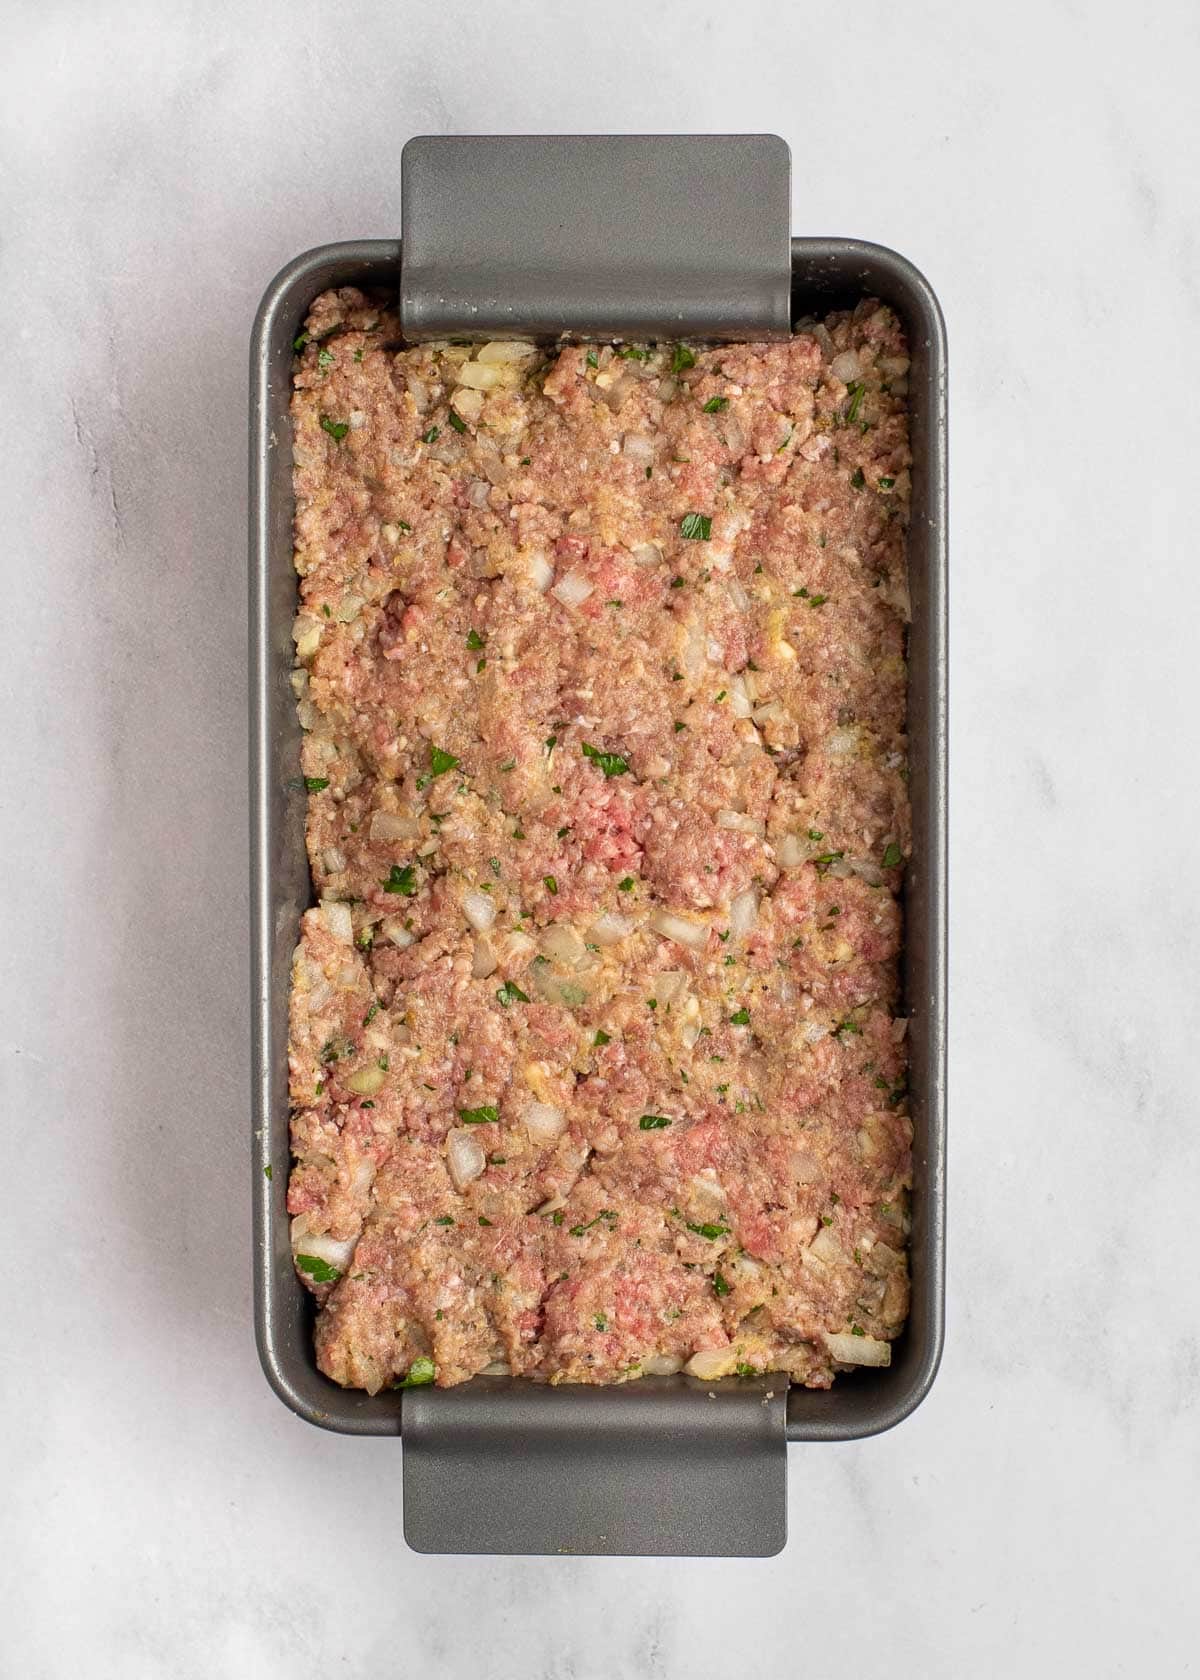 Overhead view of uncooked meatloaf in a loaf pan